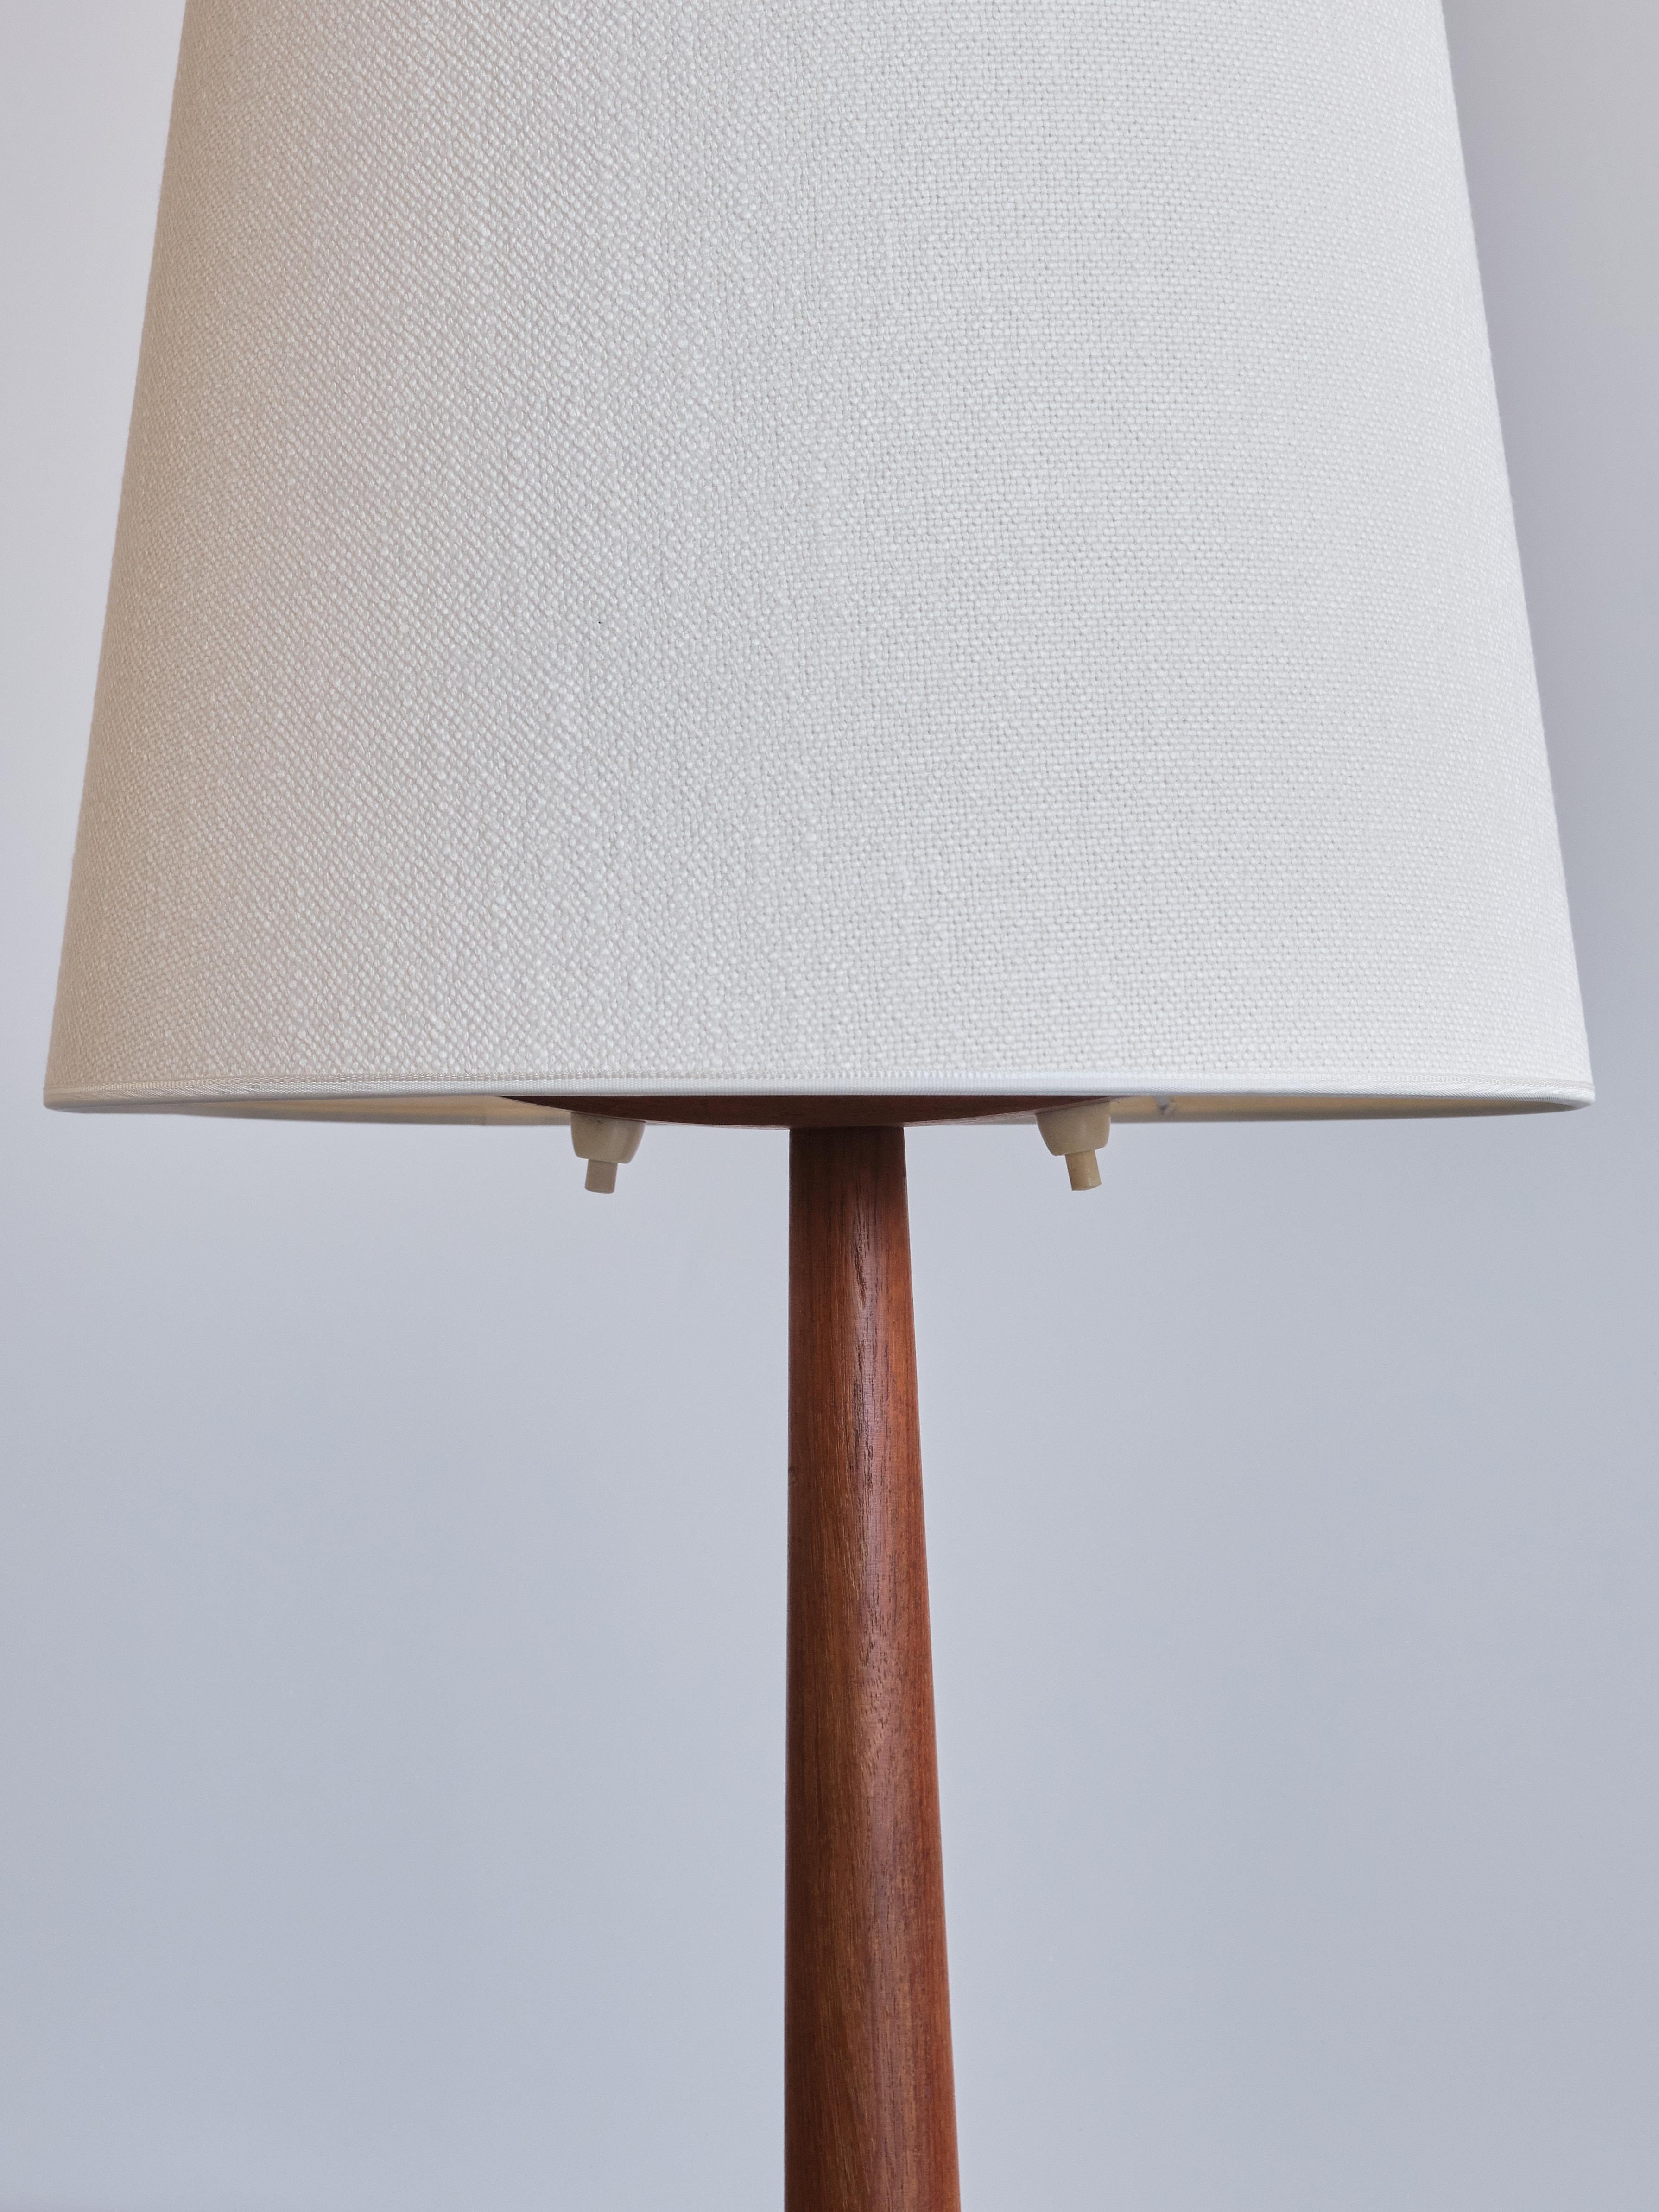 Tall Stilarmatur Tranås Table Lamp in Teak Wood with Cone Shade, Sweden, 1960s For Sale 4